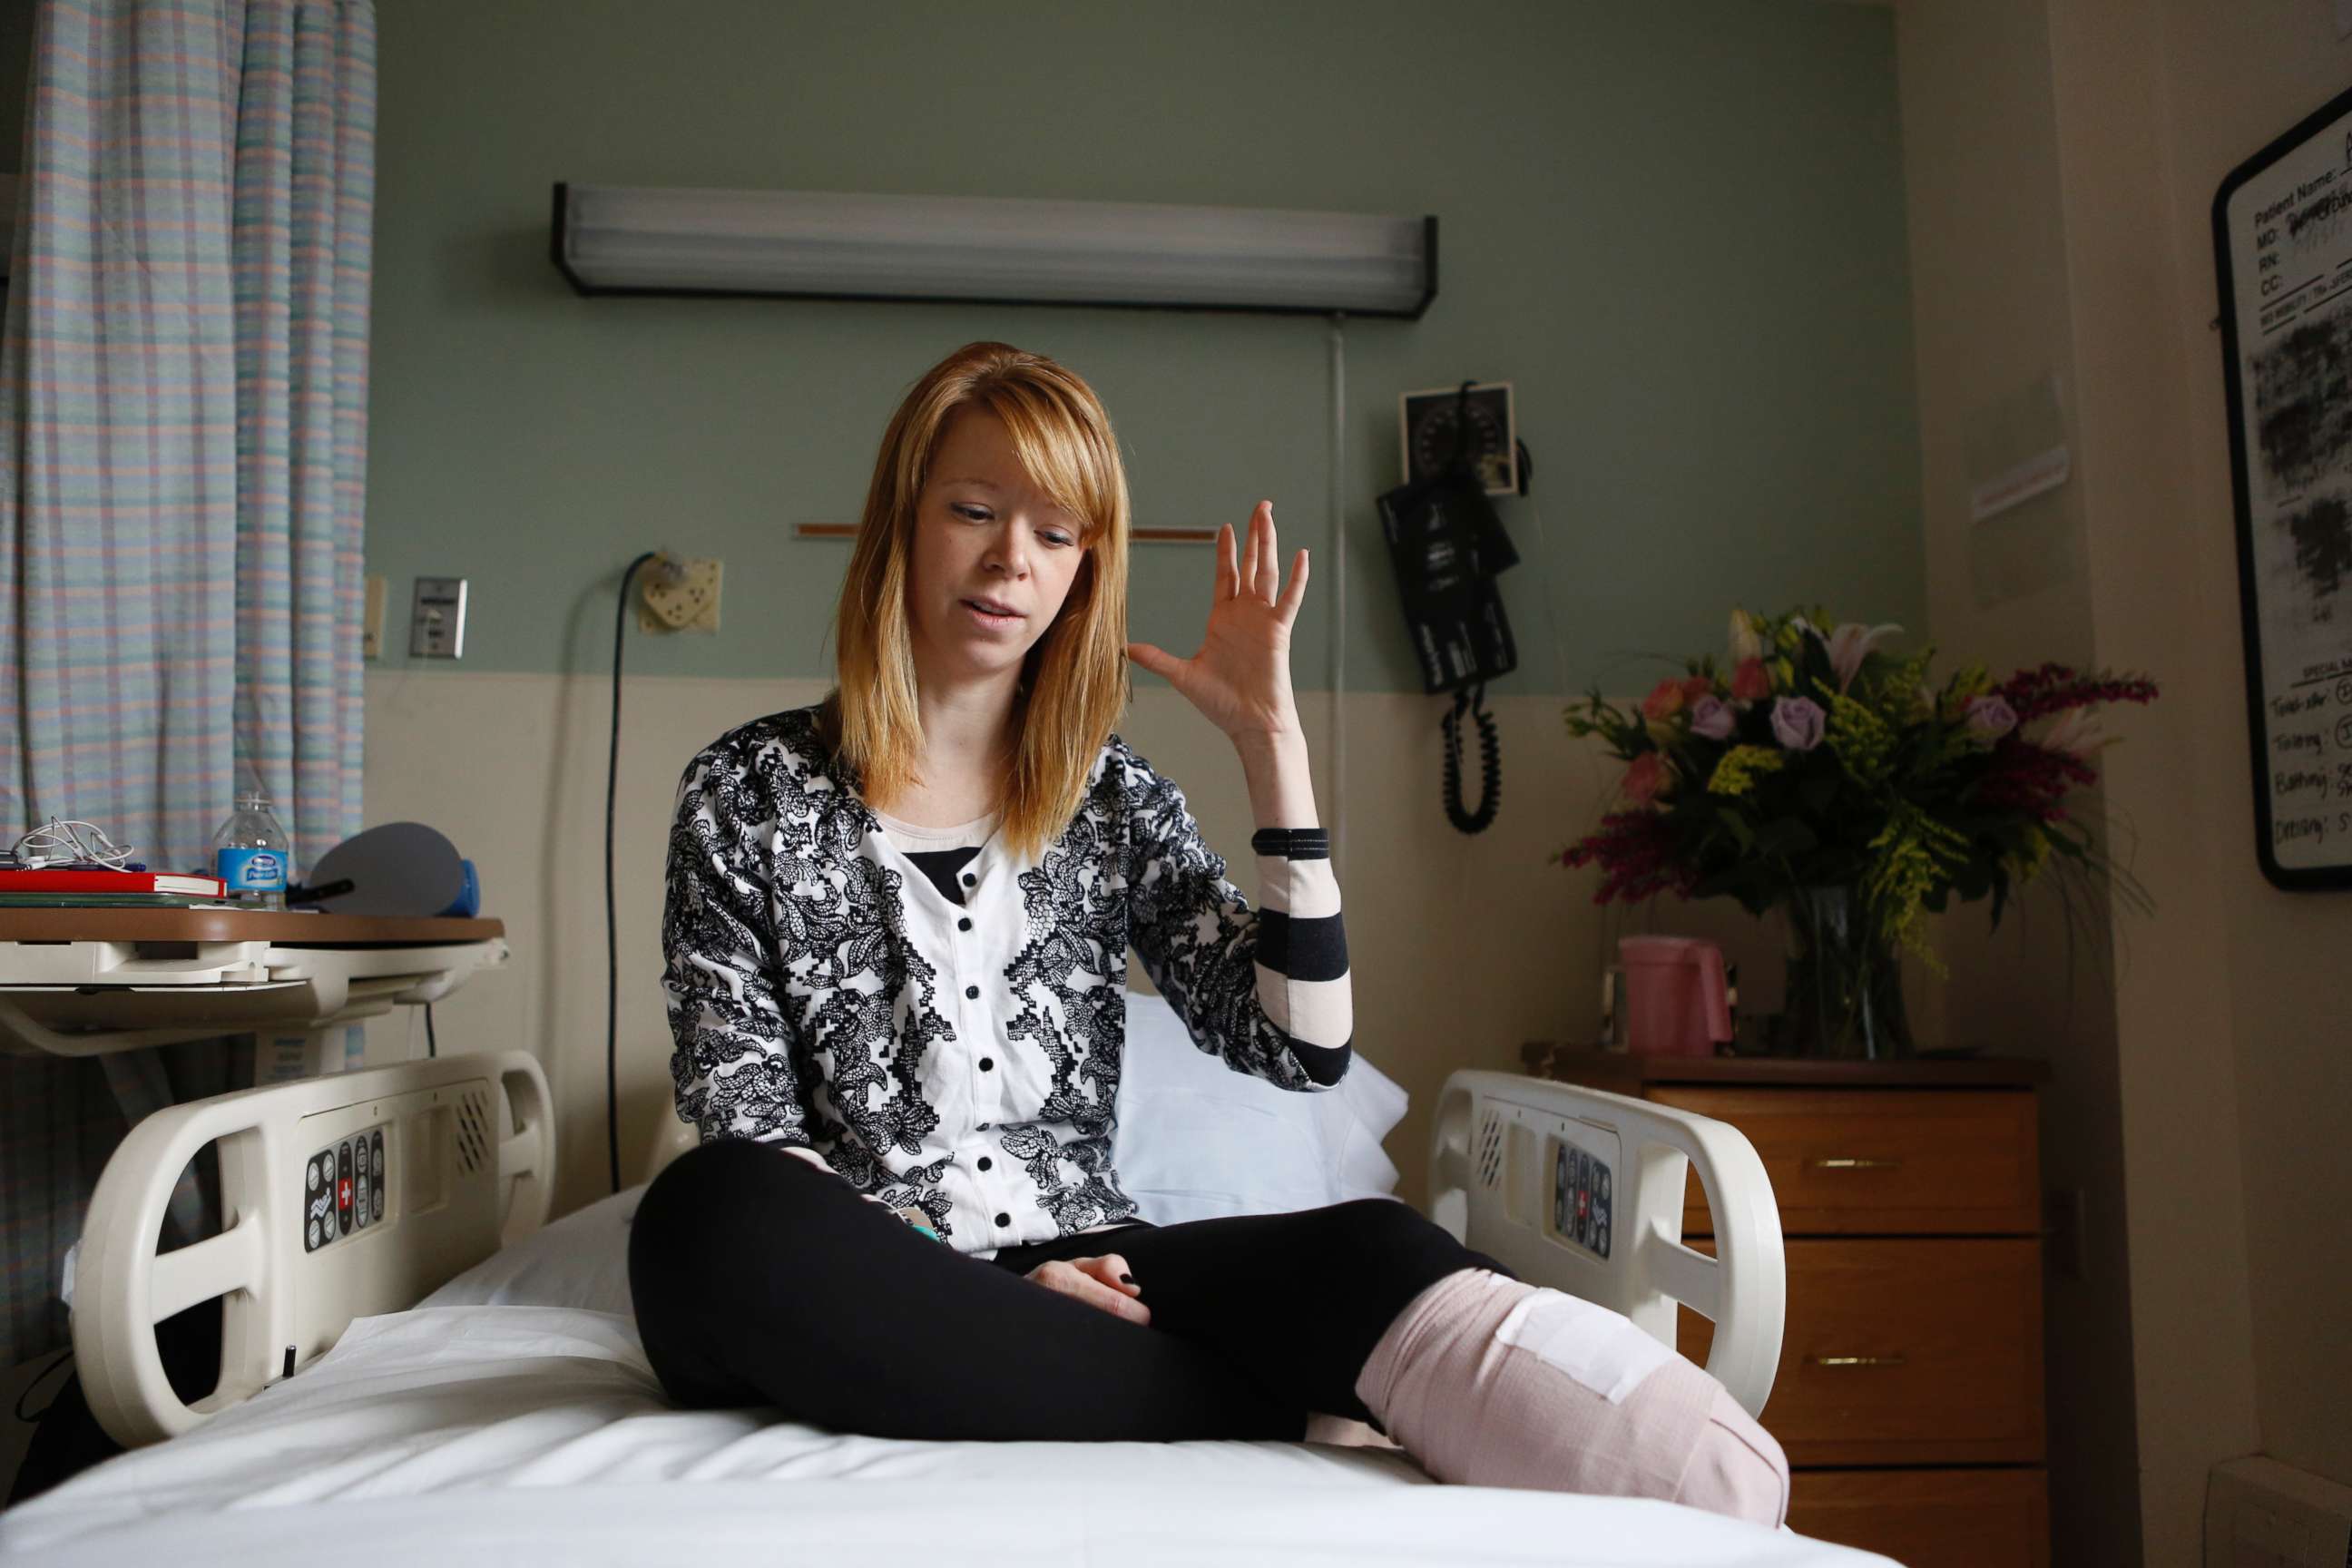 PHOTO: Adrianne Haslet, a dancer injured by one of the bombs that exploded near the Boston Marathon finish line, in her room at Spaulding Rehabilitation Hospital in Boston, April 24, 2013. 